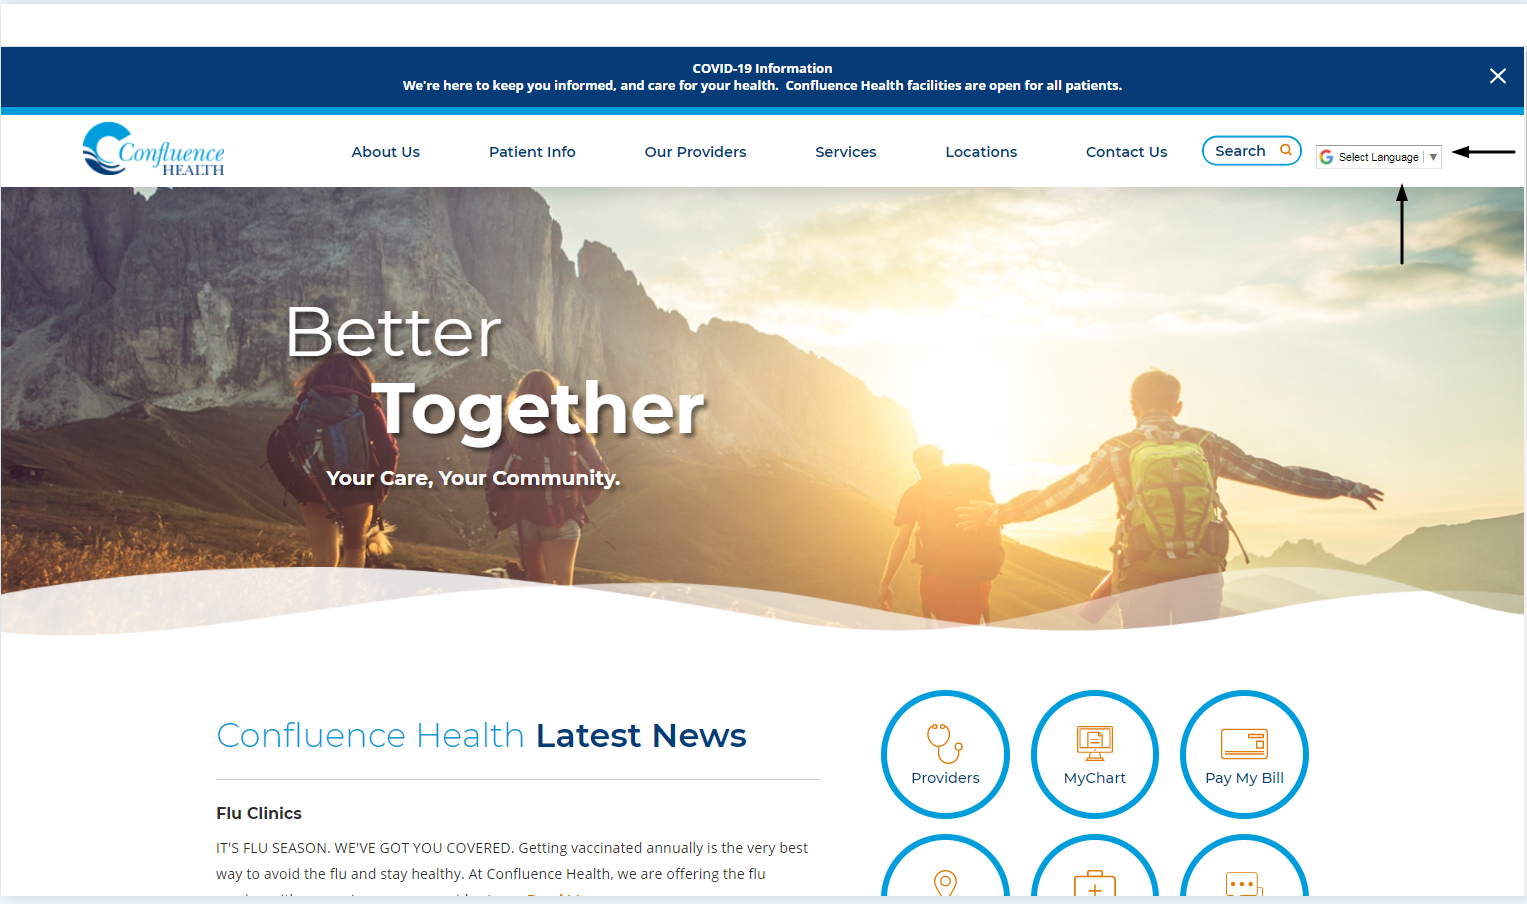 Confluence Health Safe High-quality Care With Compassion